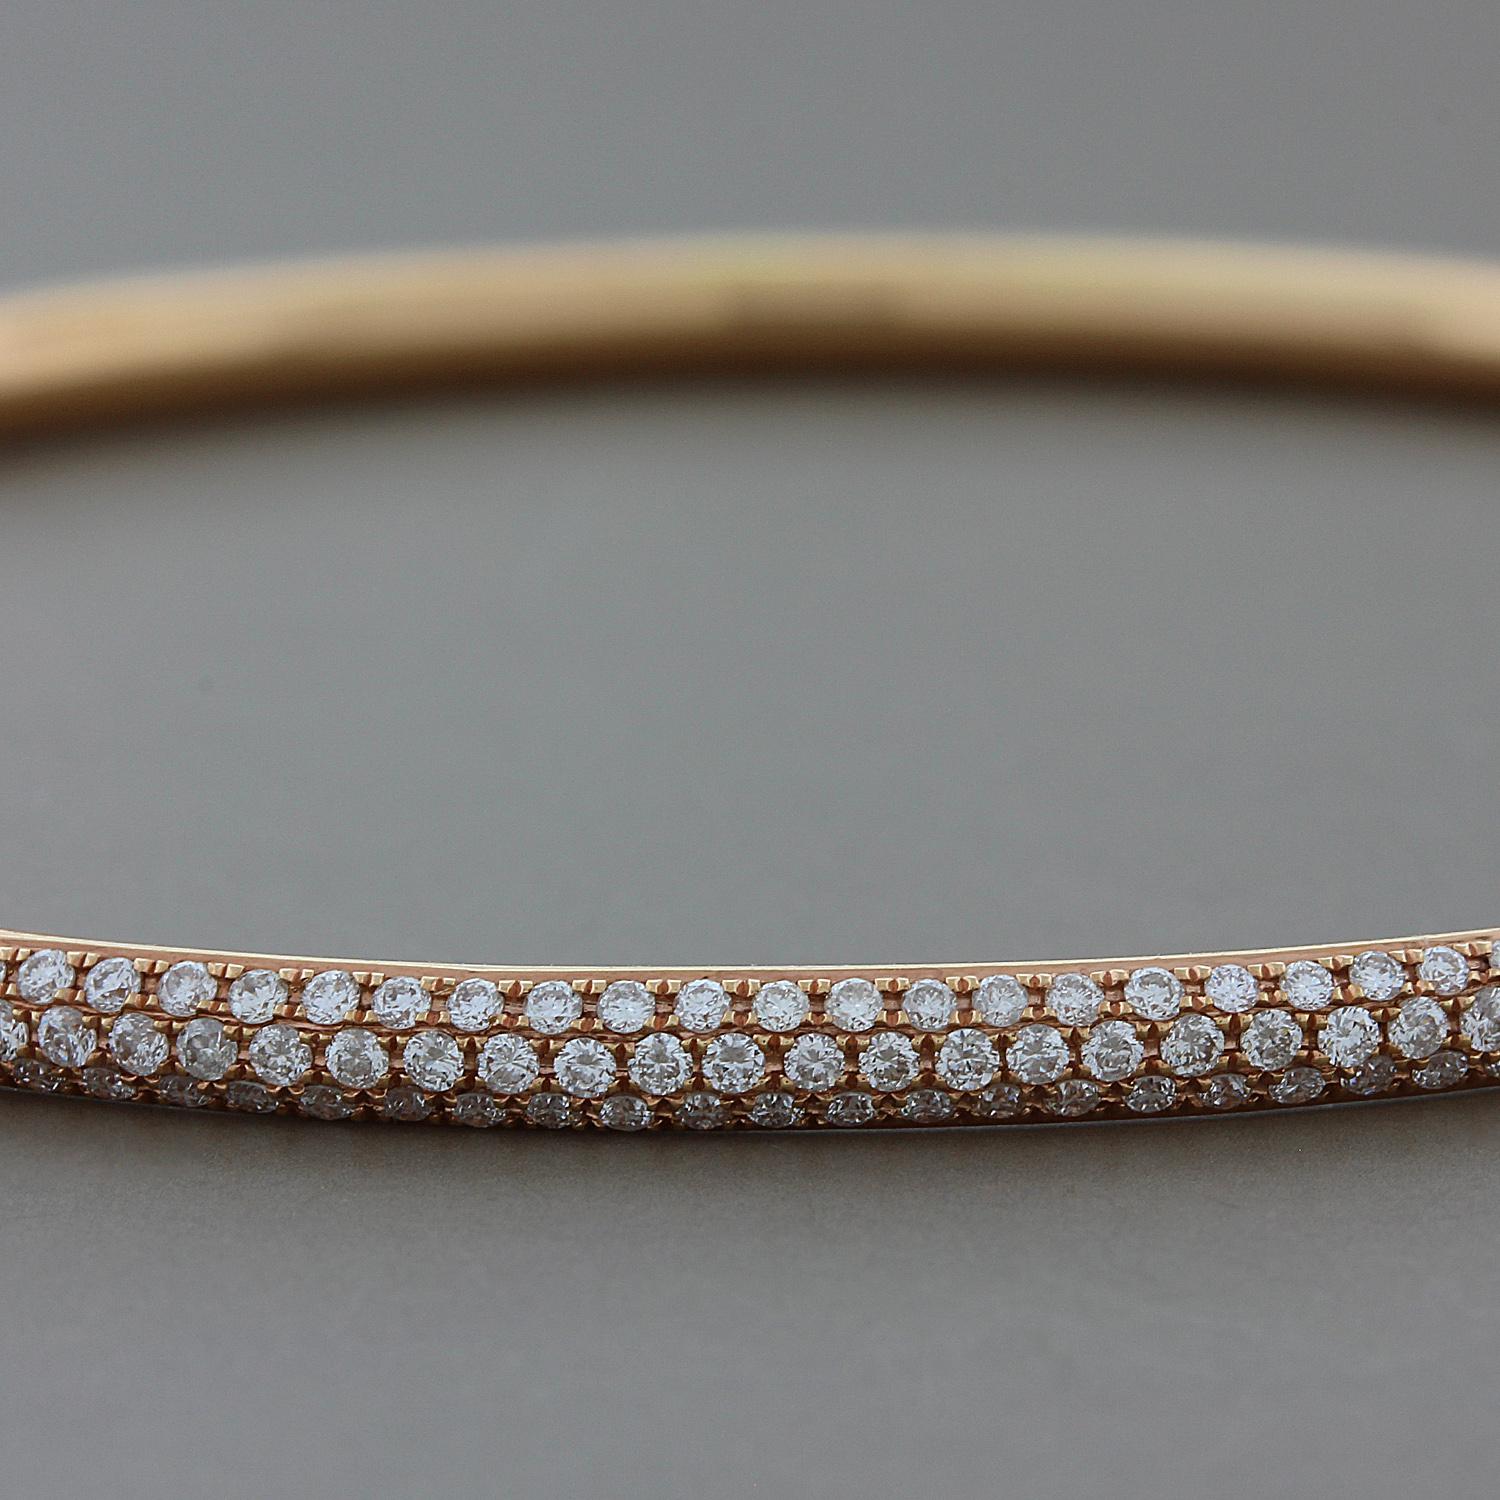 A striking eternity bangle featuring 3.12 carats of round cut, colorless VS quality, diamonds pave set in 18K rose gold.

Fits wrists up to 8 inches
